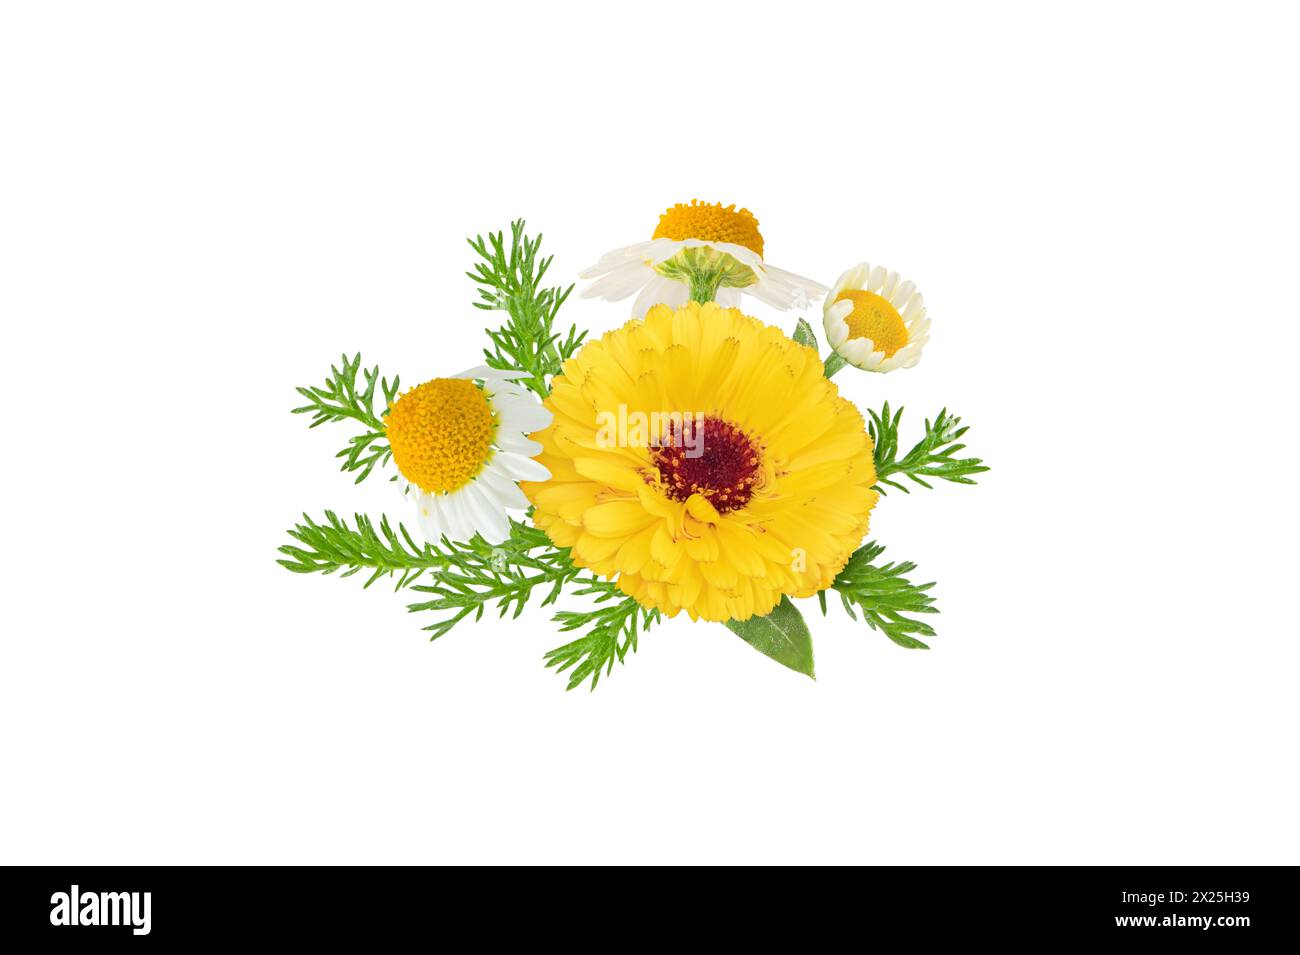 Calendula and chamomile flowers and leaves bunch isolated on white. White daisy and pot marigold in bloom.  Chamaemelum nobile and calendula officinal Stock Photo